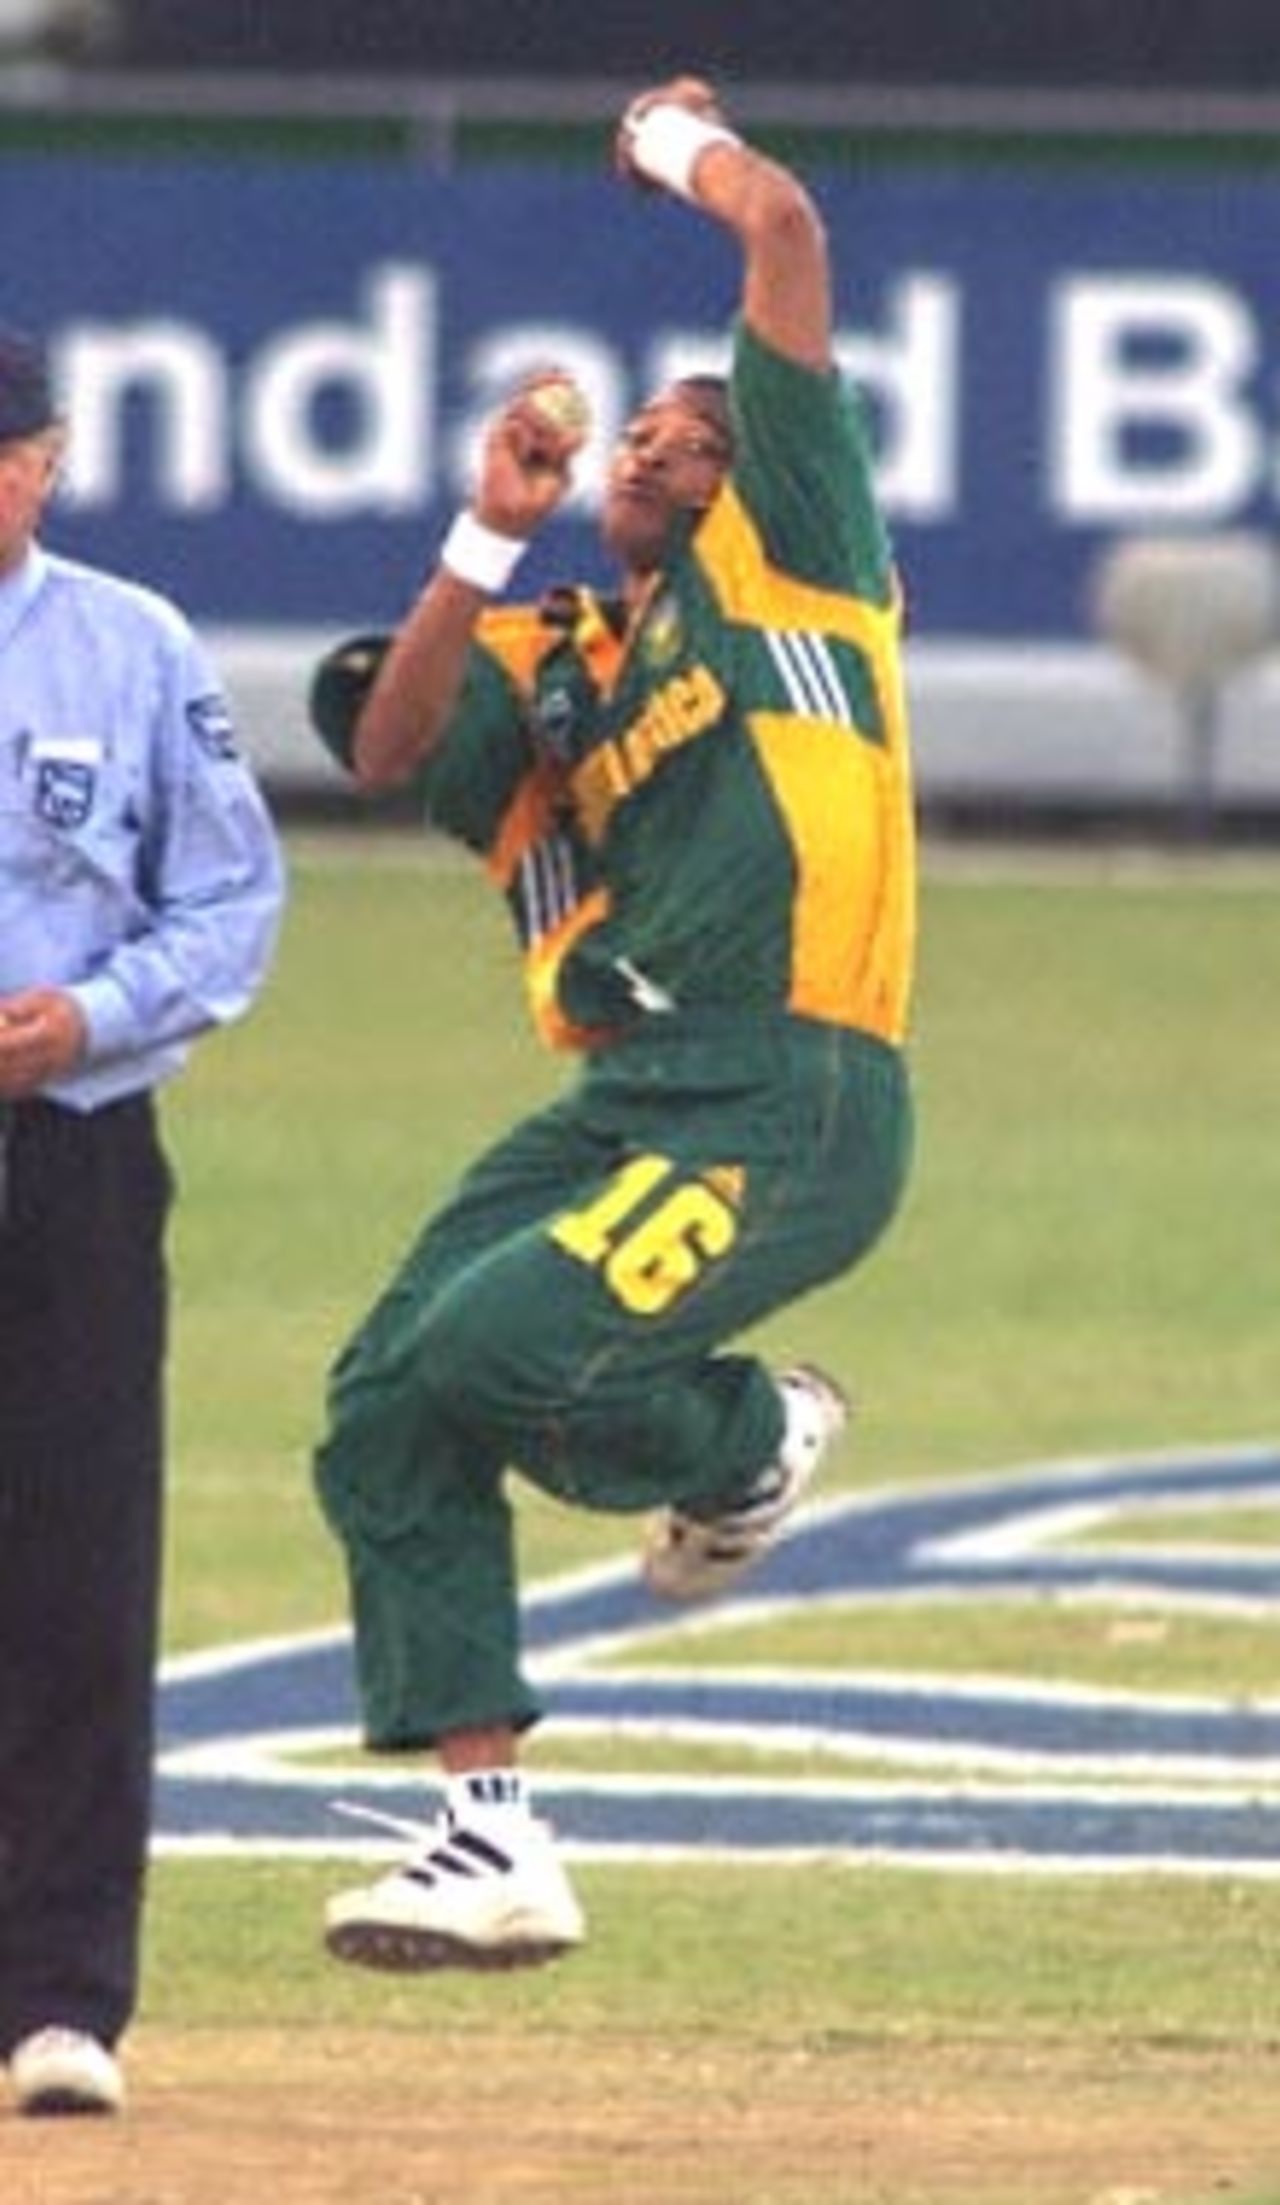 South African bowler Makhaya Ntini delievers a ball to Australian batsman Damien Martyn (not in picture) during a ODI match at the Kingsmead oval in Durban, 12 April 2000.Ntini has taken four wickets as the first three one day match series got under way and South Africa is currently 165 for 7